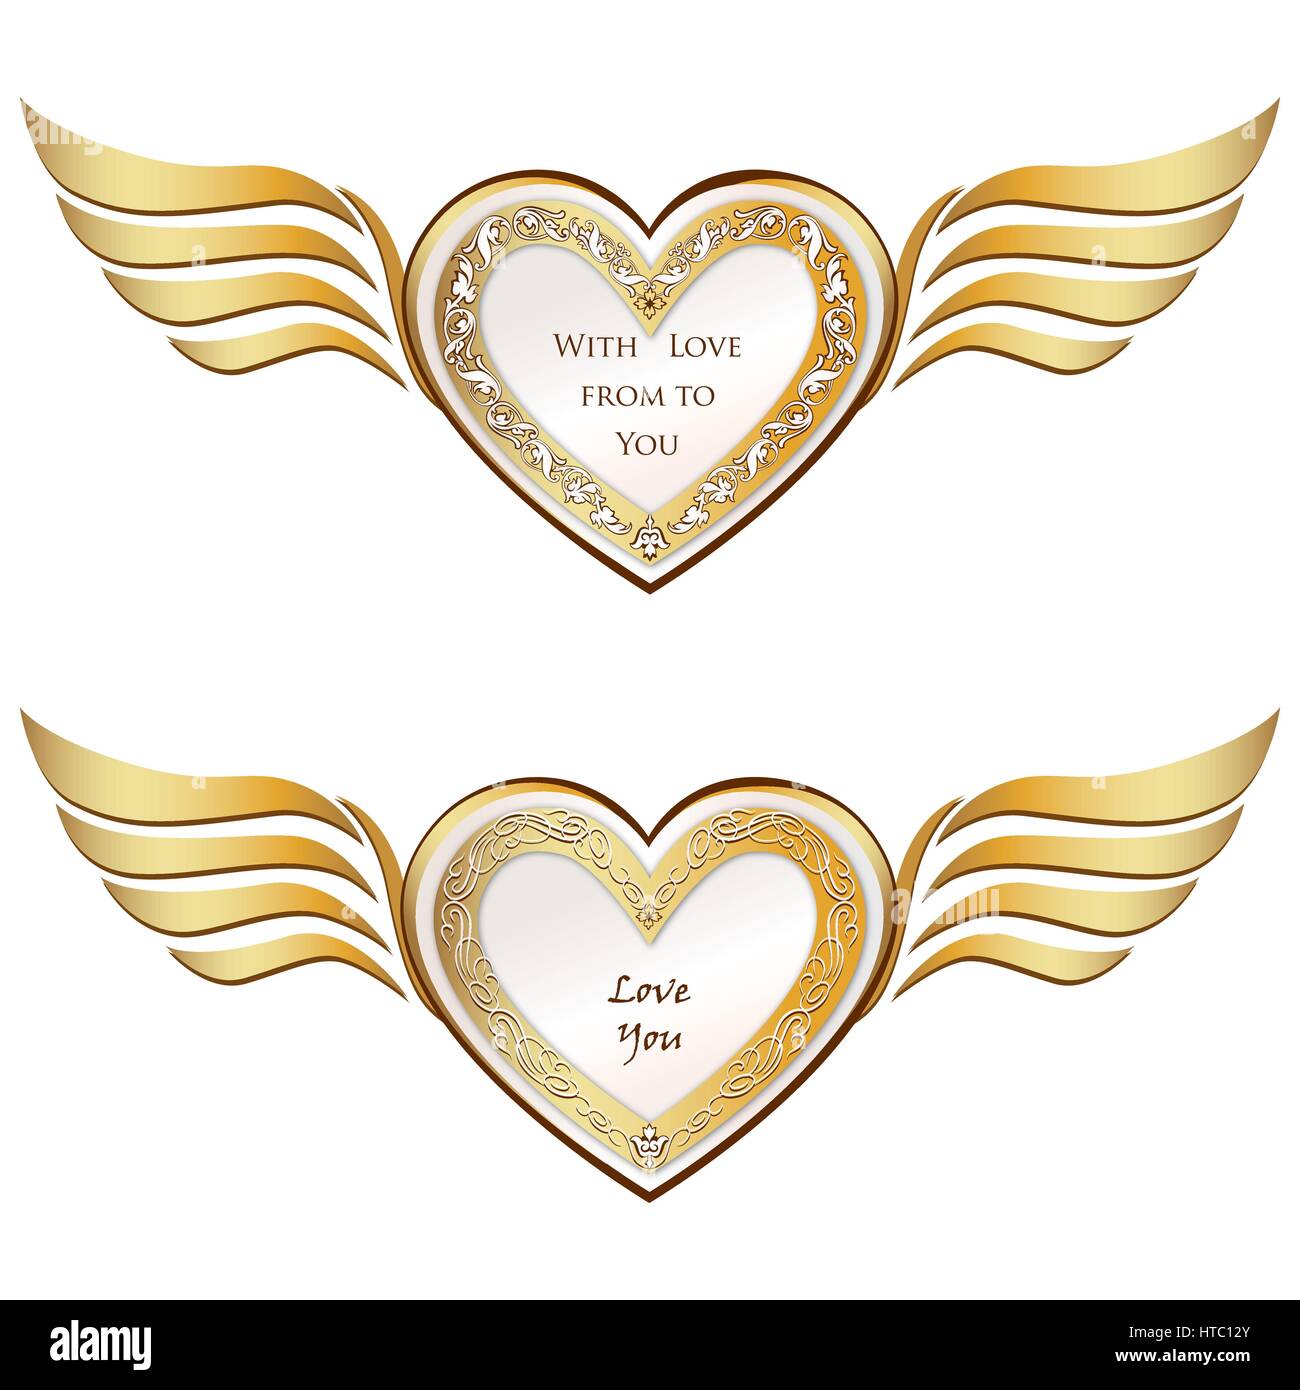 Golden Wing Heart Set Love Hearts Pattern For Valentine S Day Holiday Ornamental Decor Element Good For Greeting Card Design Stock Vector Image Art Alamy